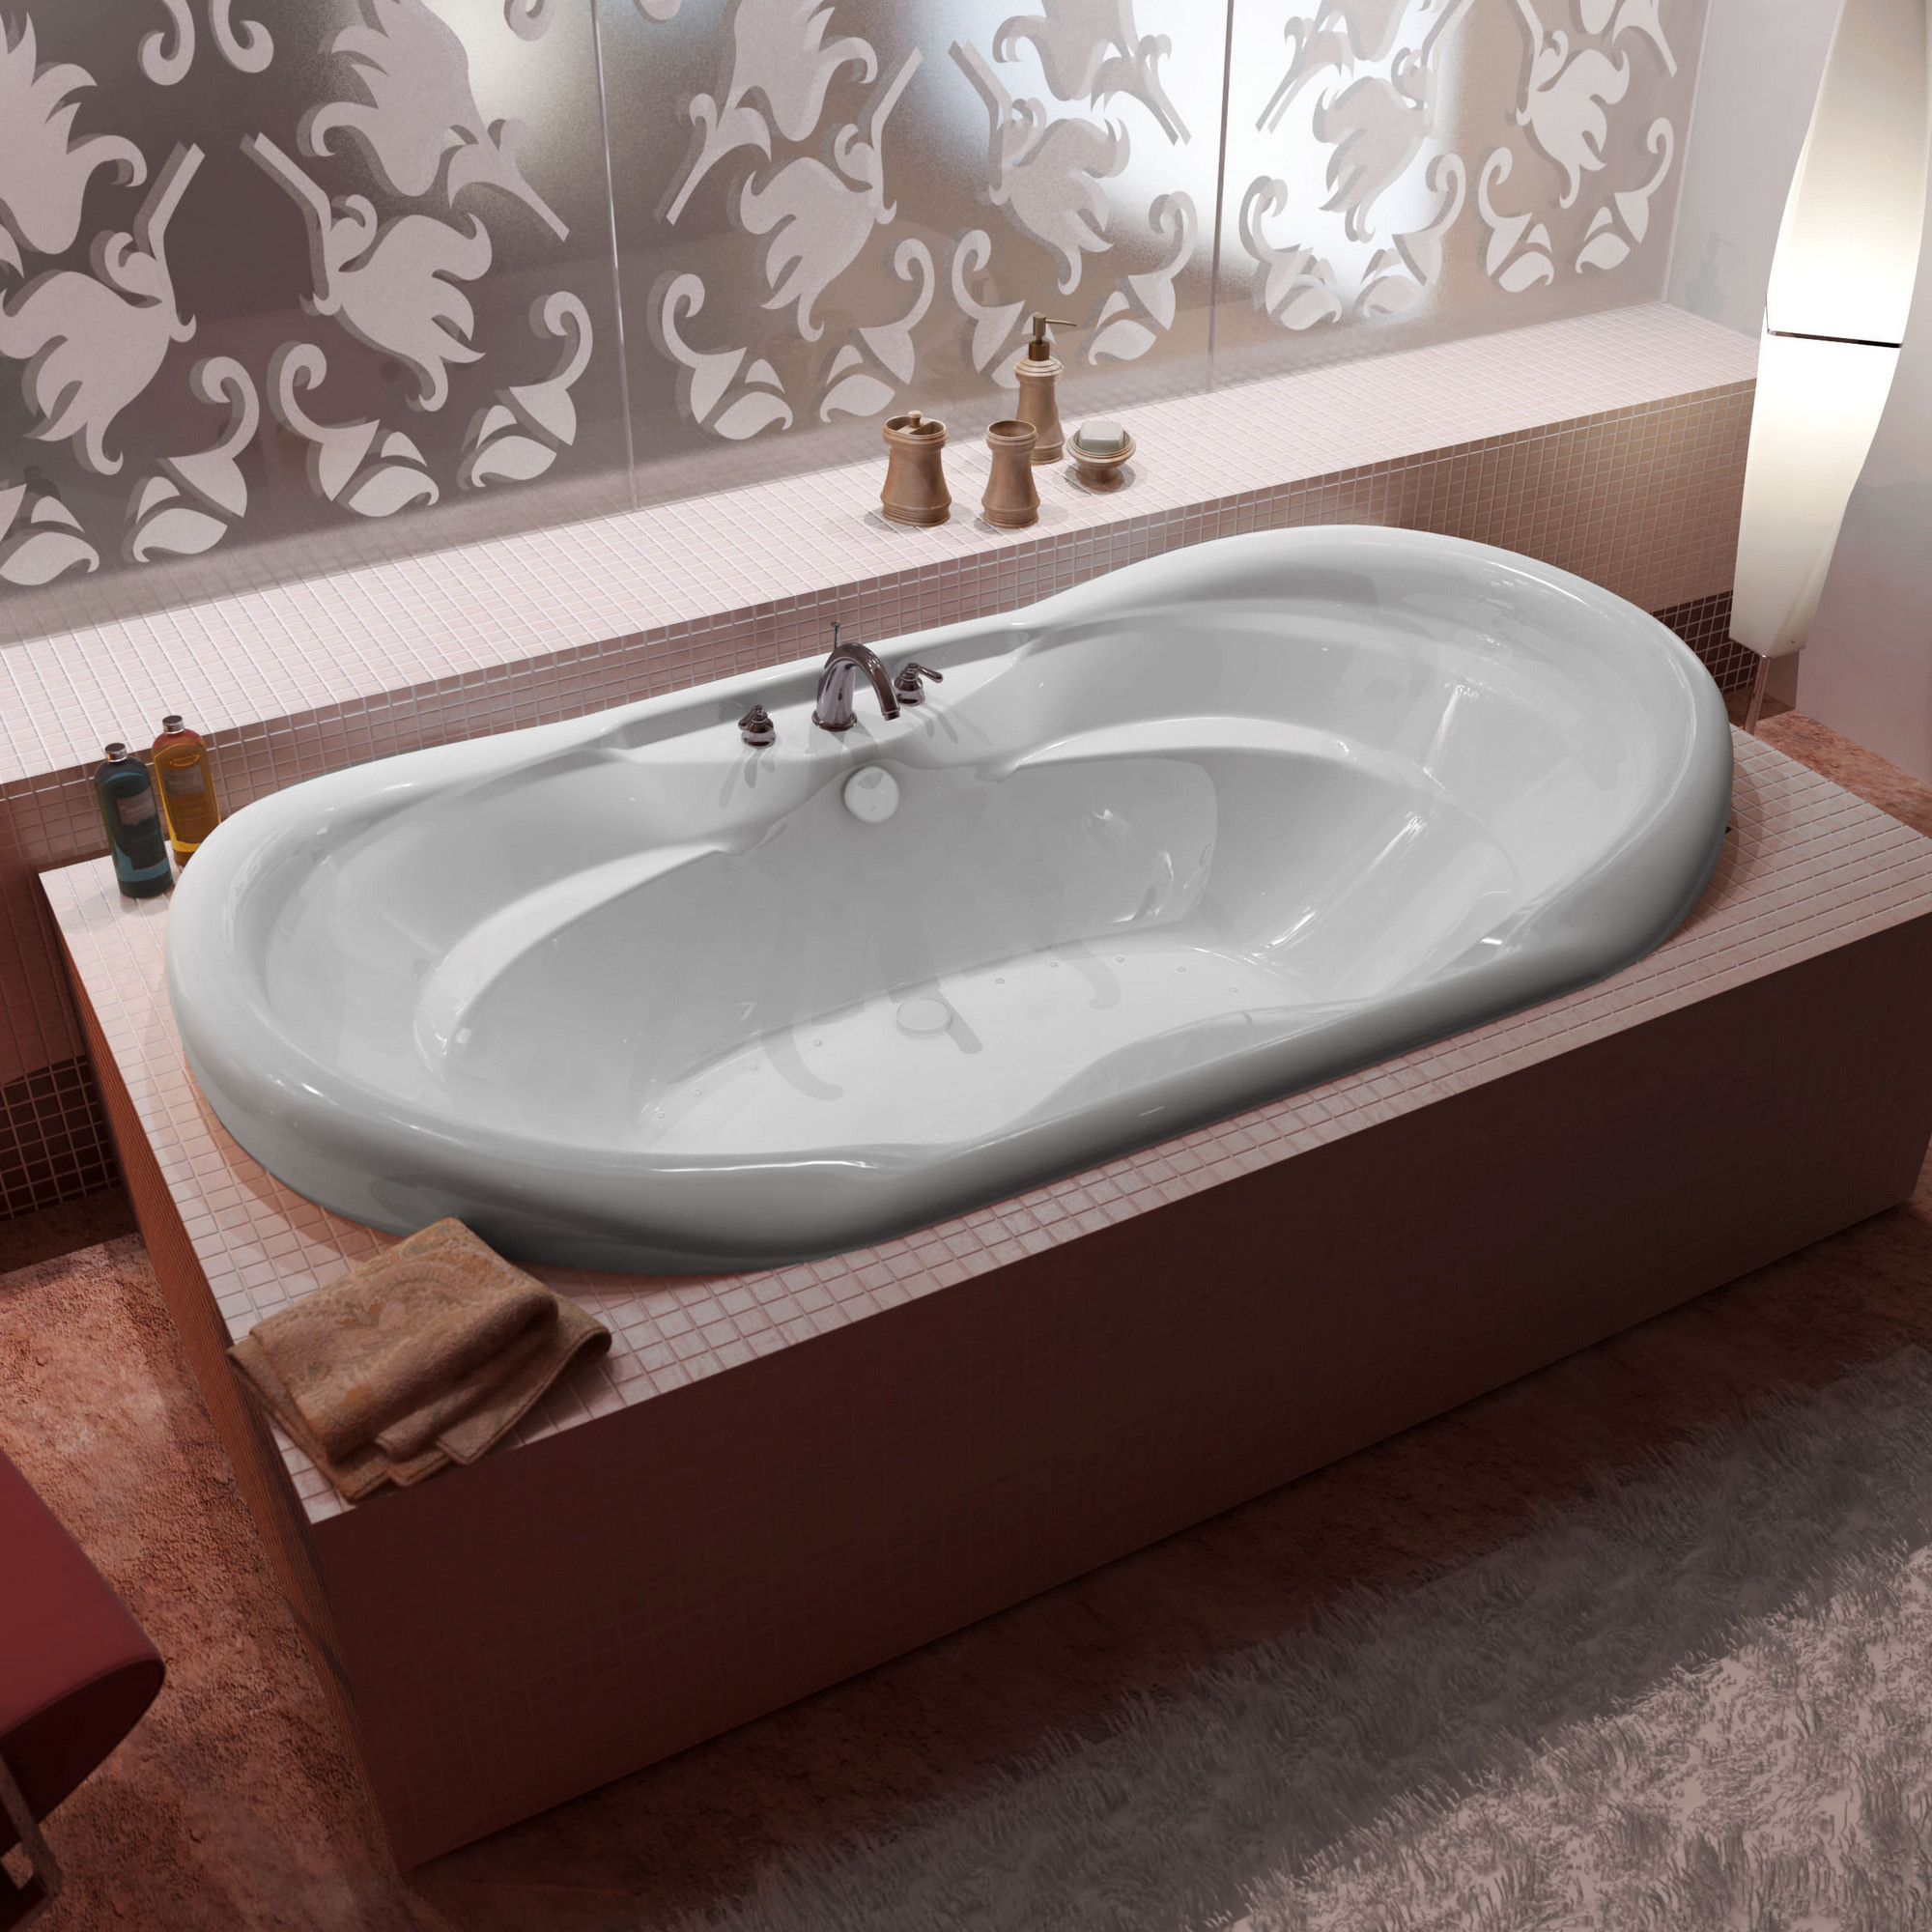 MediTub 4170IAR Atlantis Indulgence Oval Air Jetted Tub With Right Blower